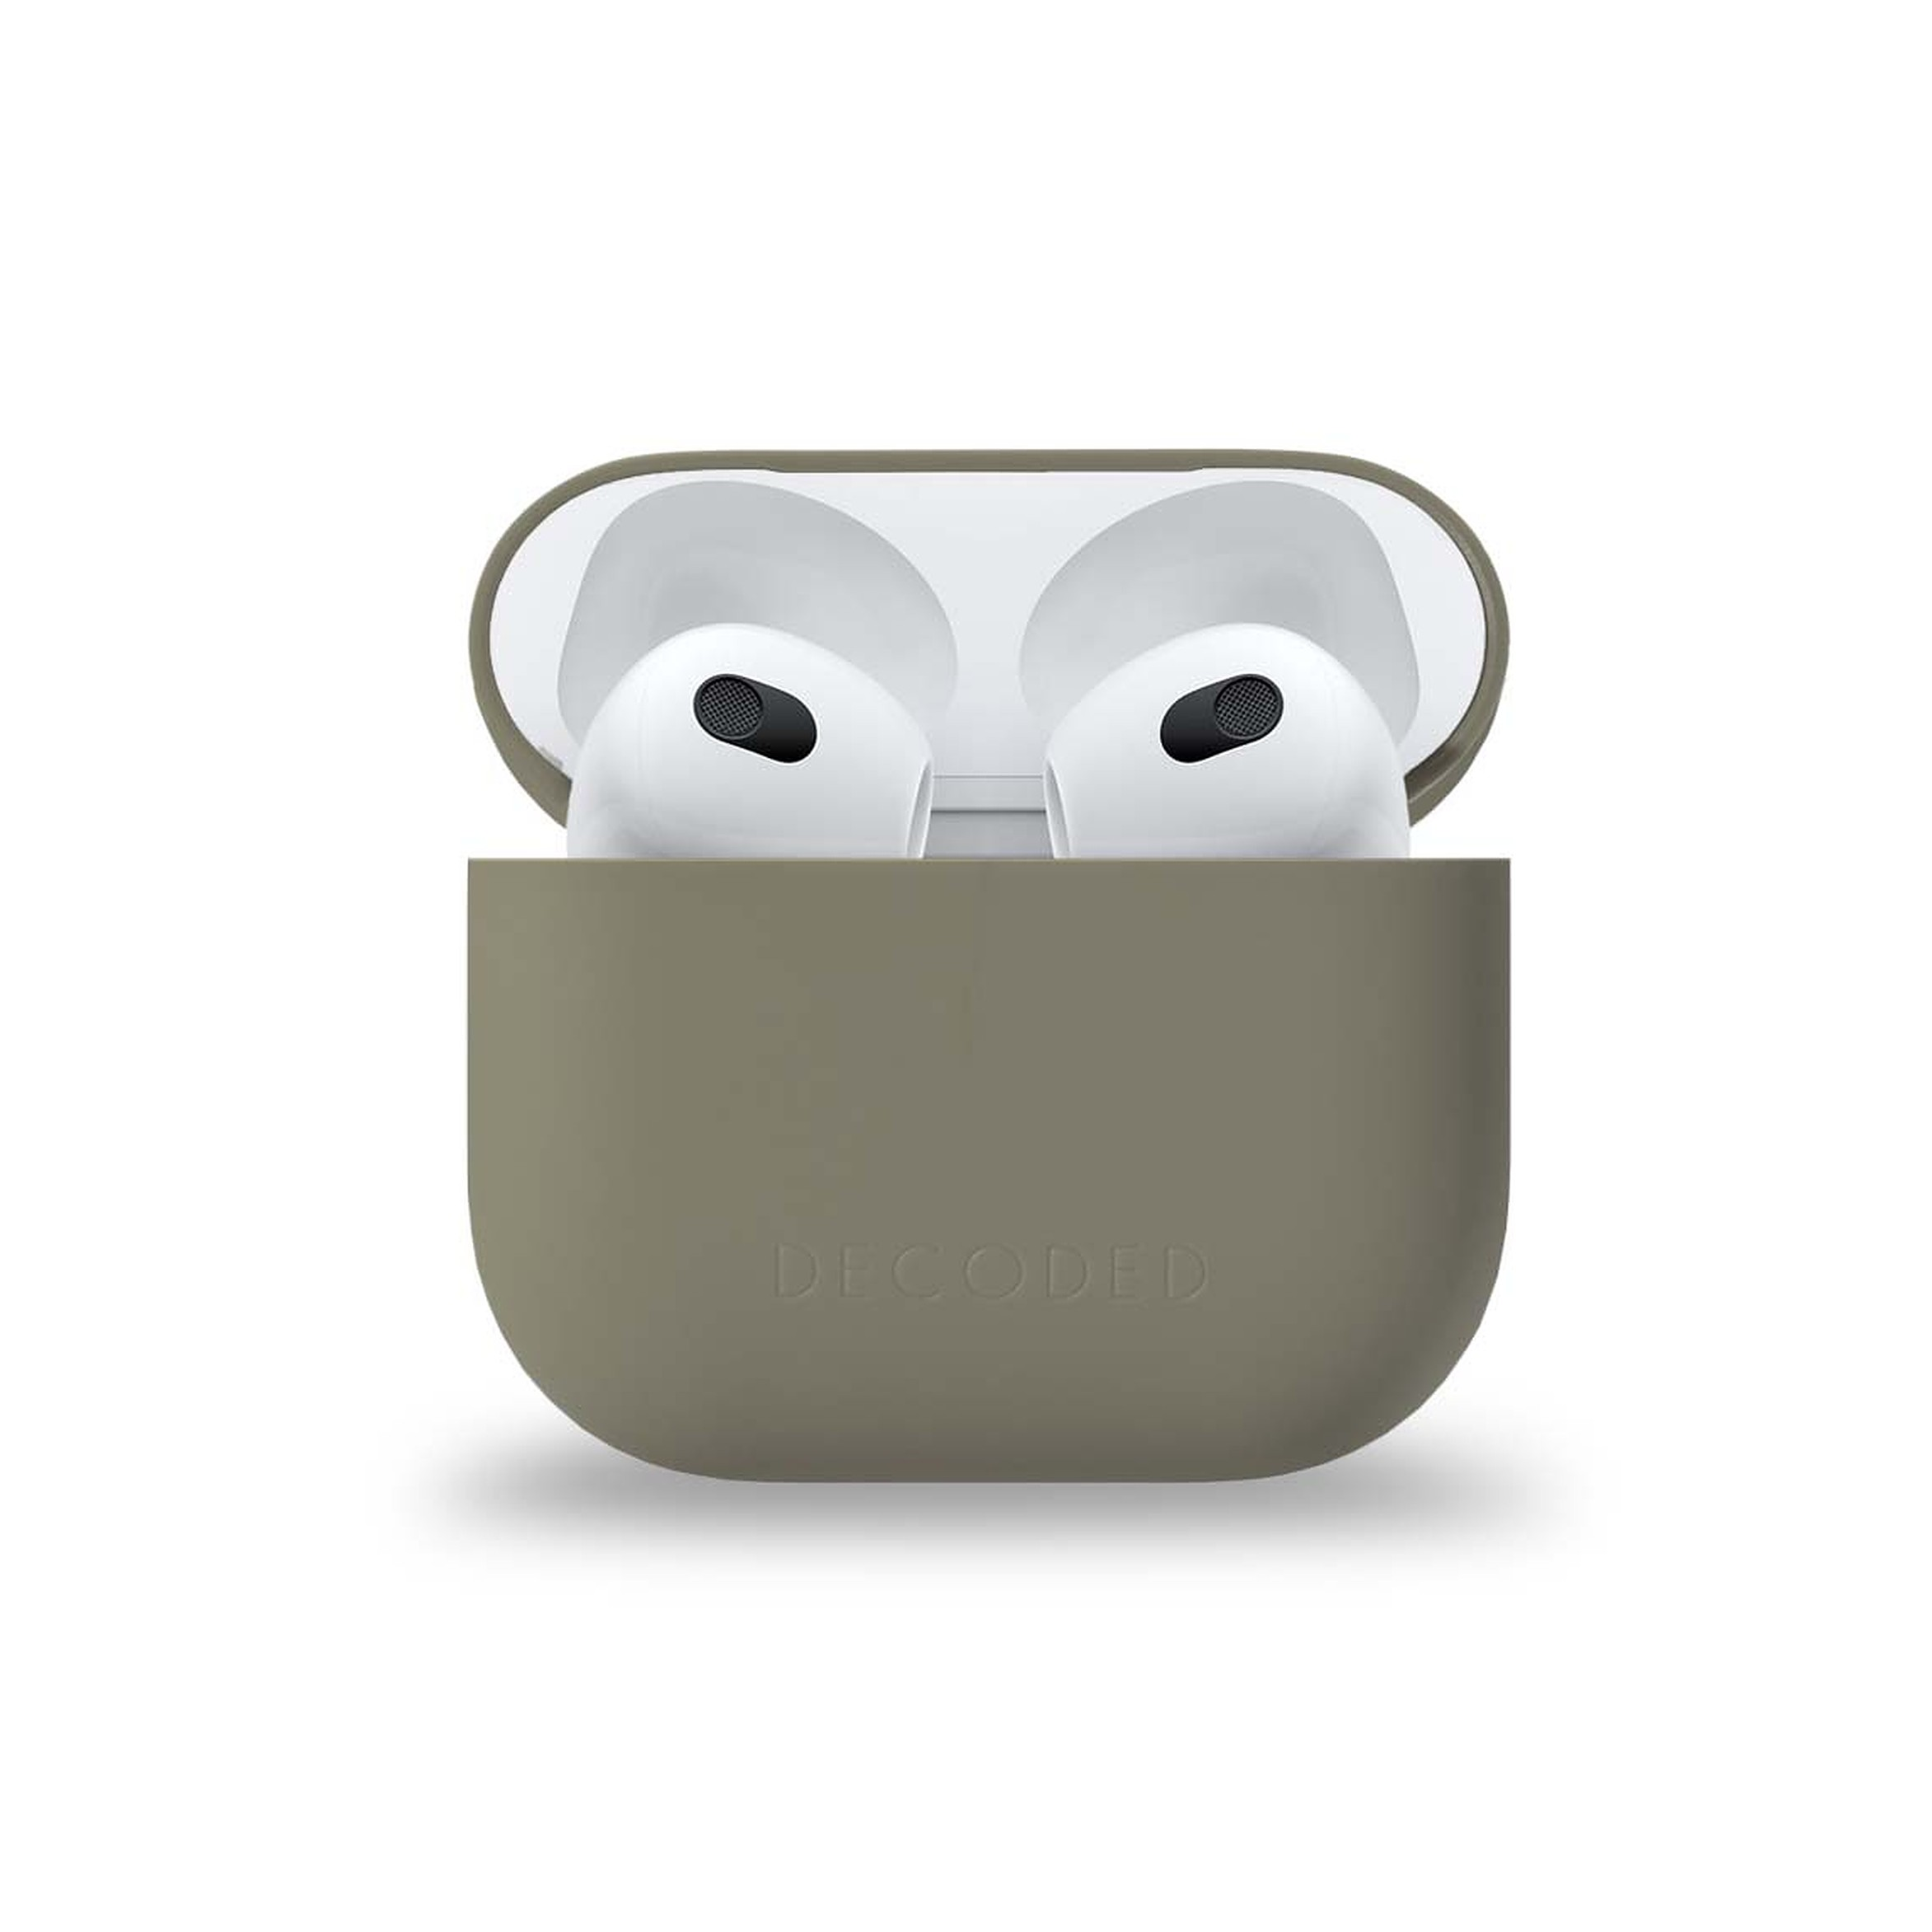 Apple, Cover, DECODED 3, Olive Aircase, Full Airpods